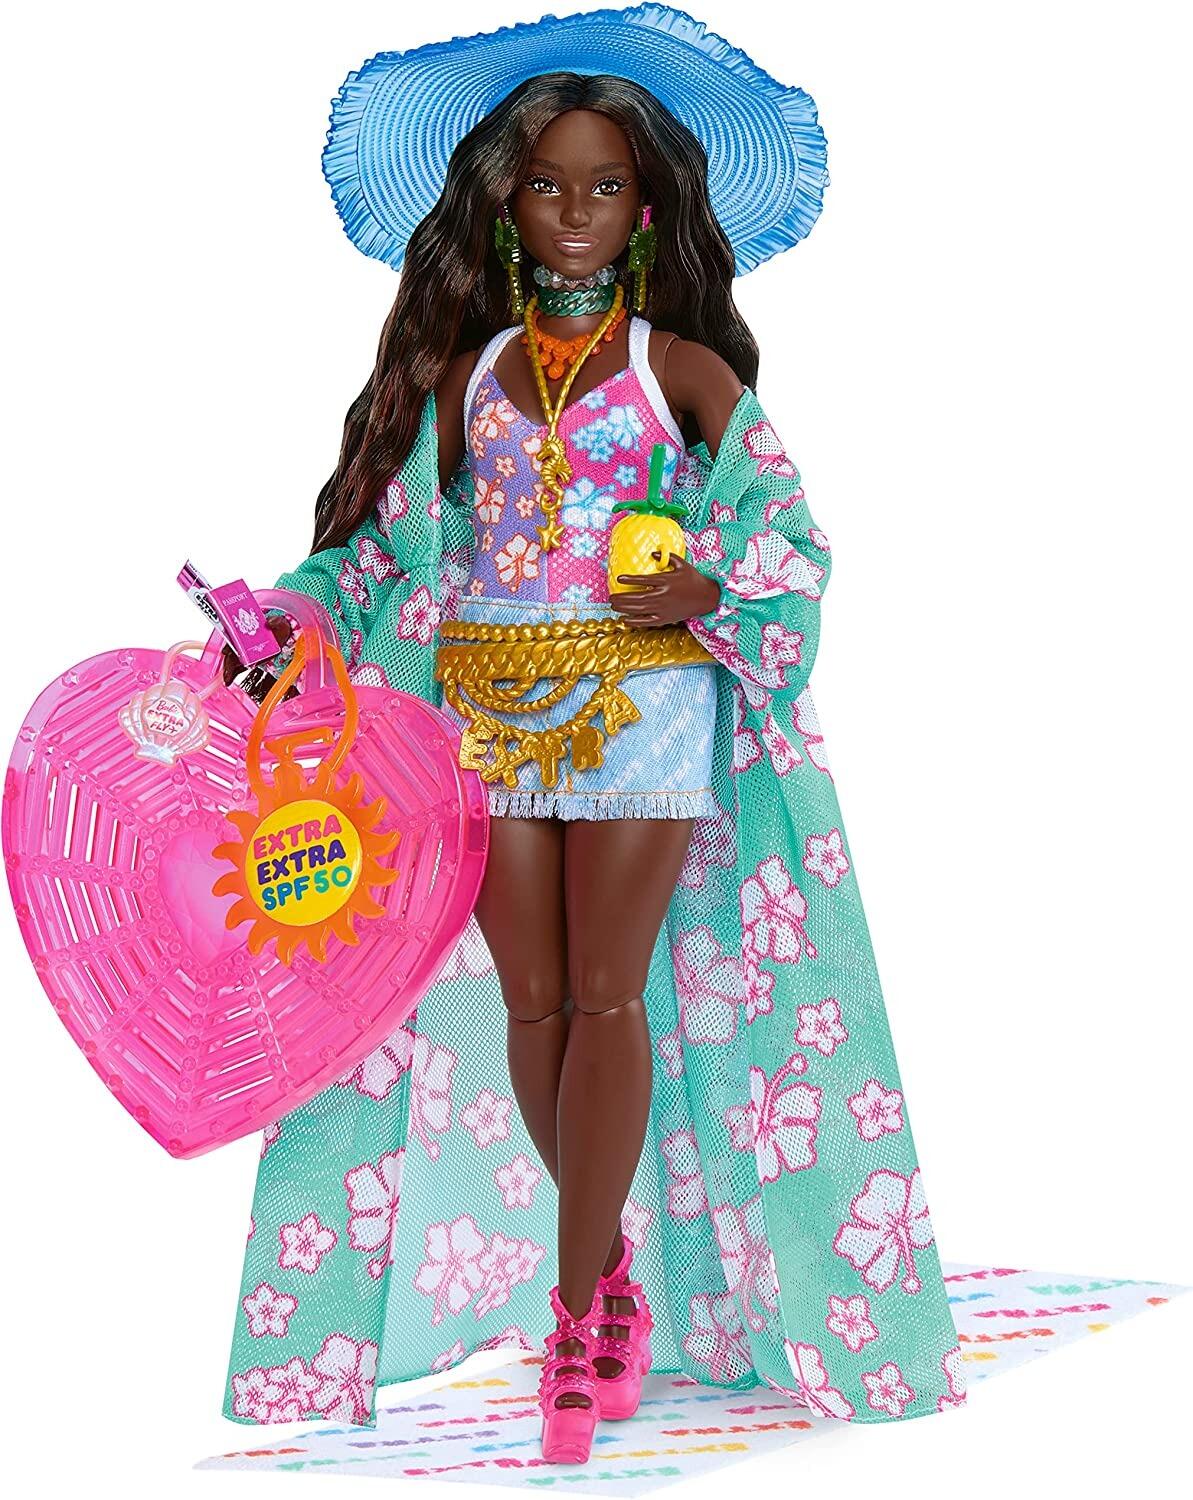 Barbie Extra Fly, Hat and Tropical Coverup with Oversized Bag, Travel Barbie Doll with Beach Fashion